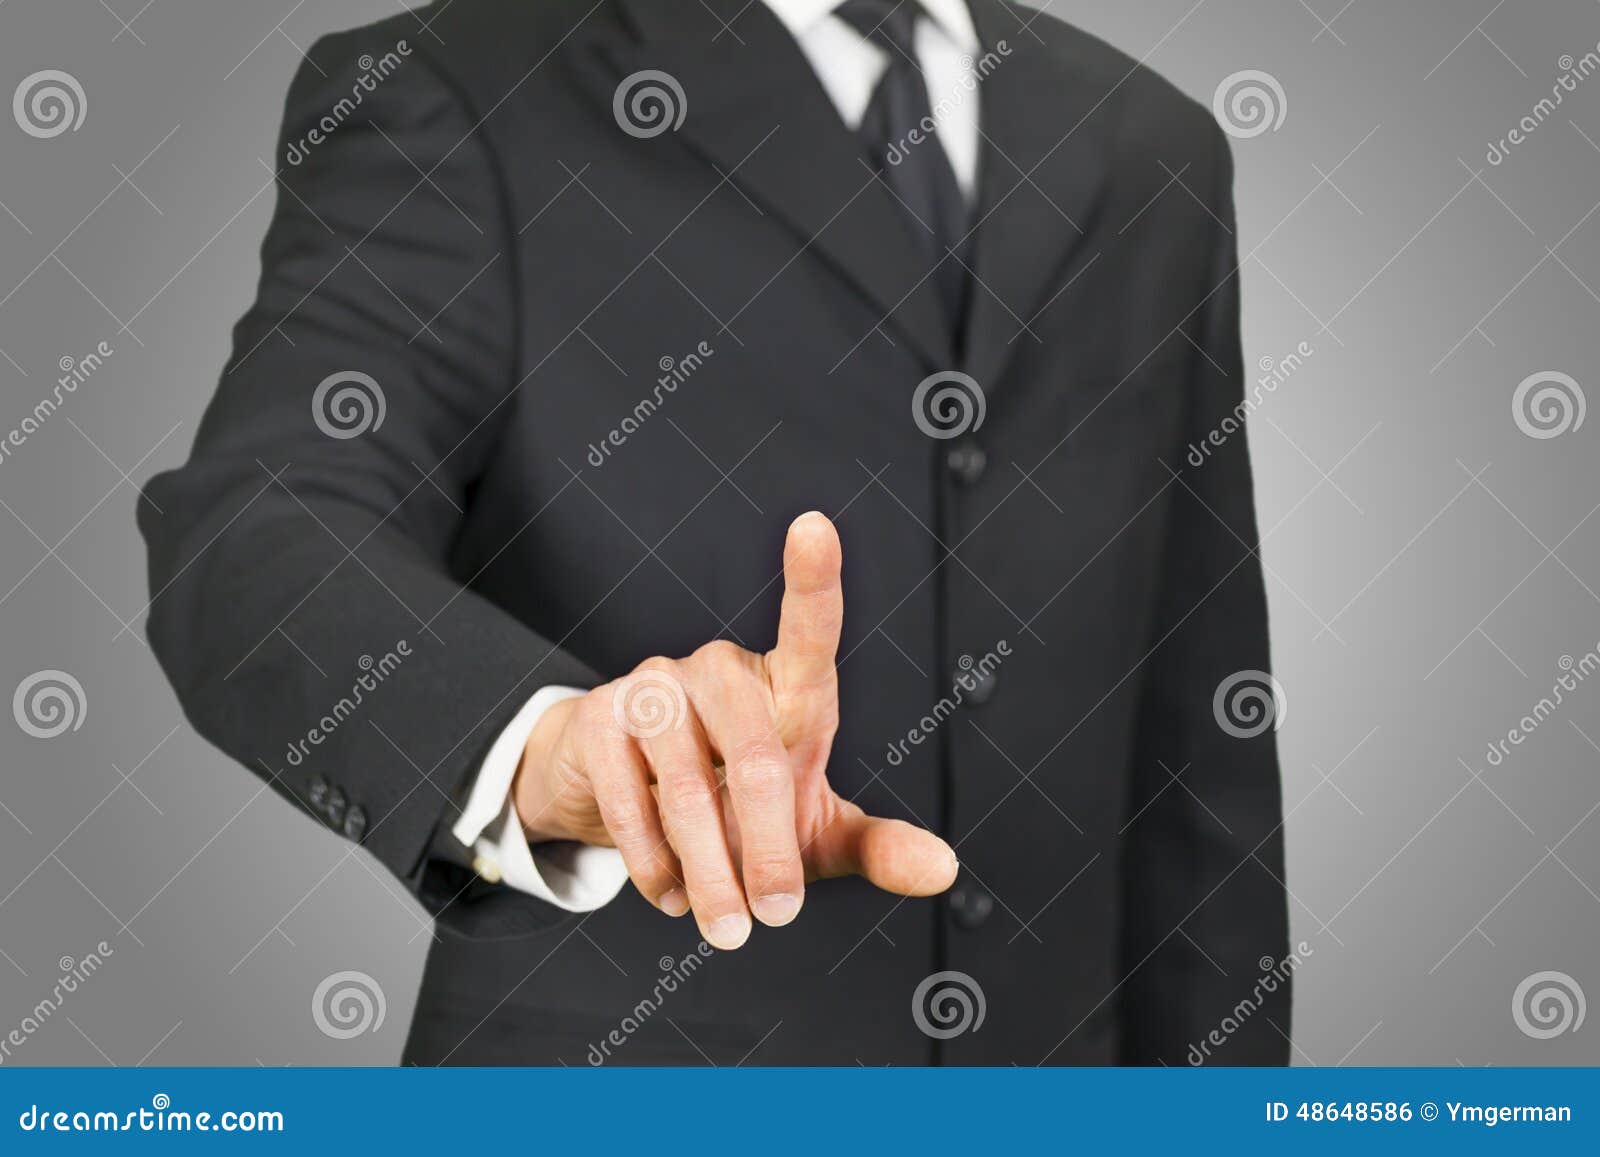 businessman clicking on touch screen